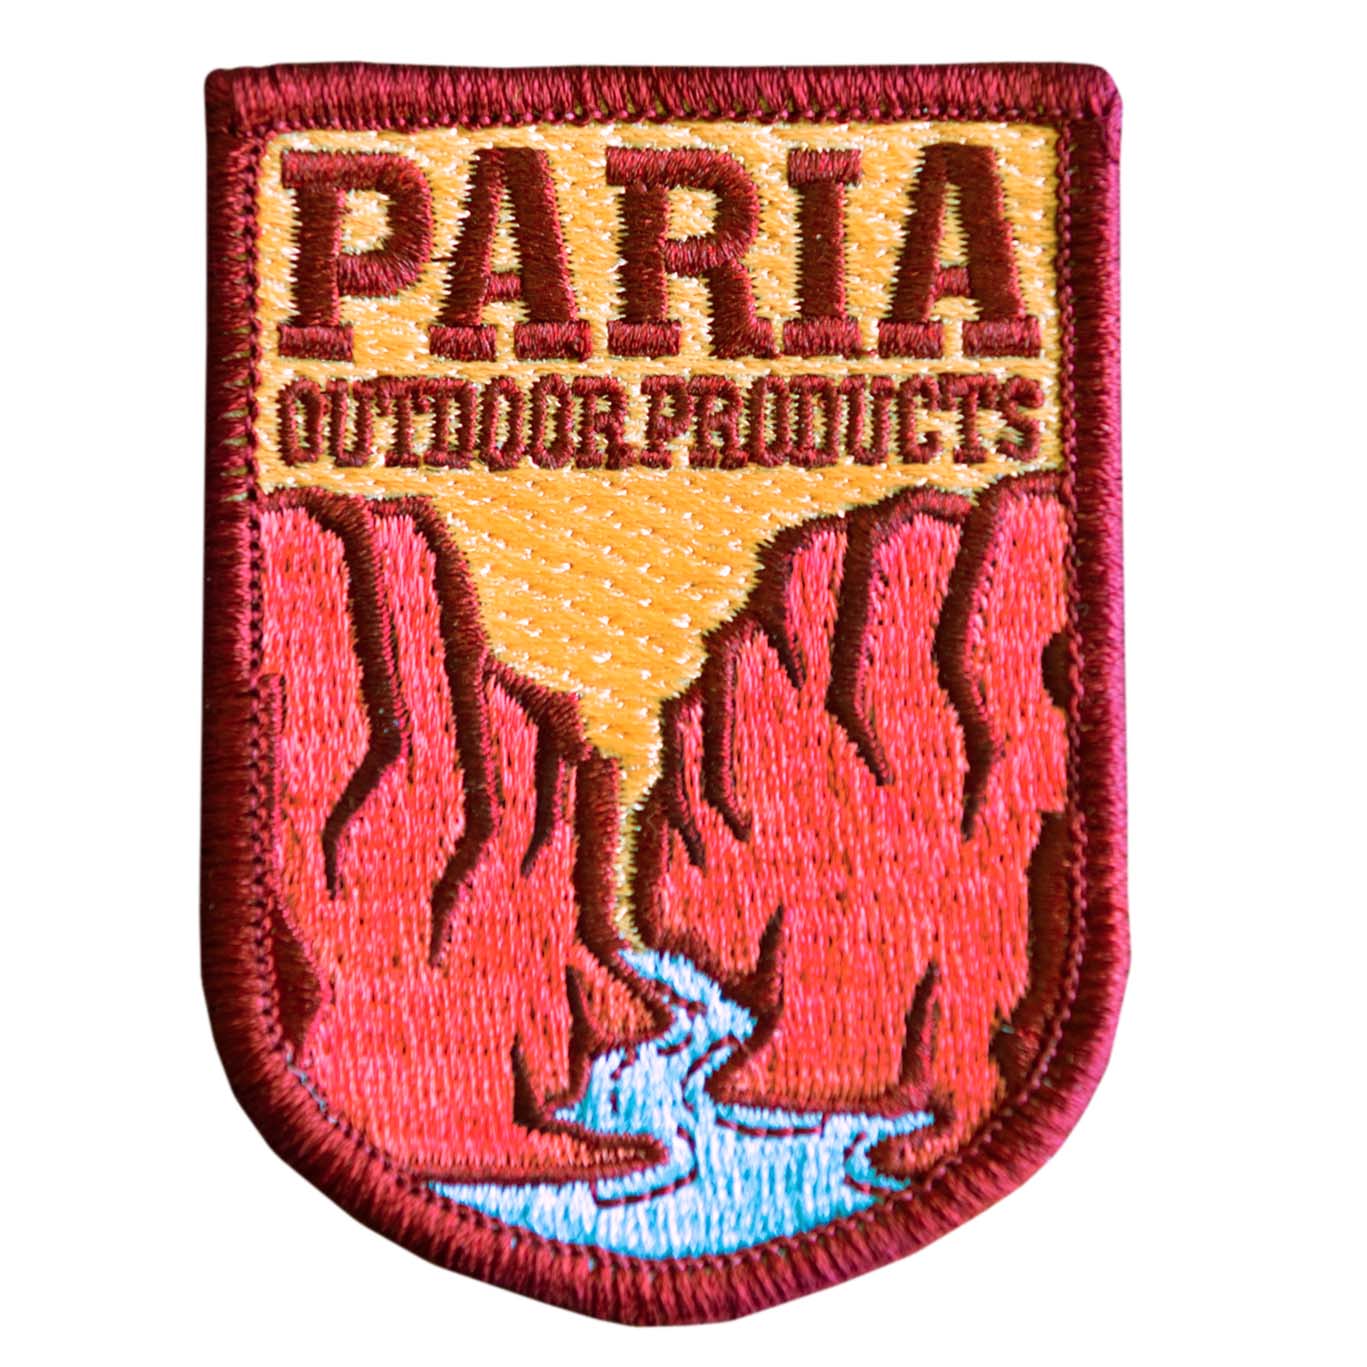 Patches Products Outdoor Paria Logo